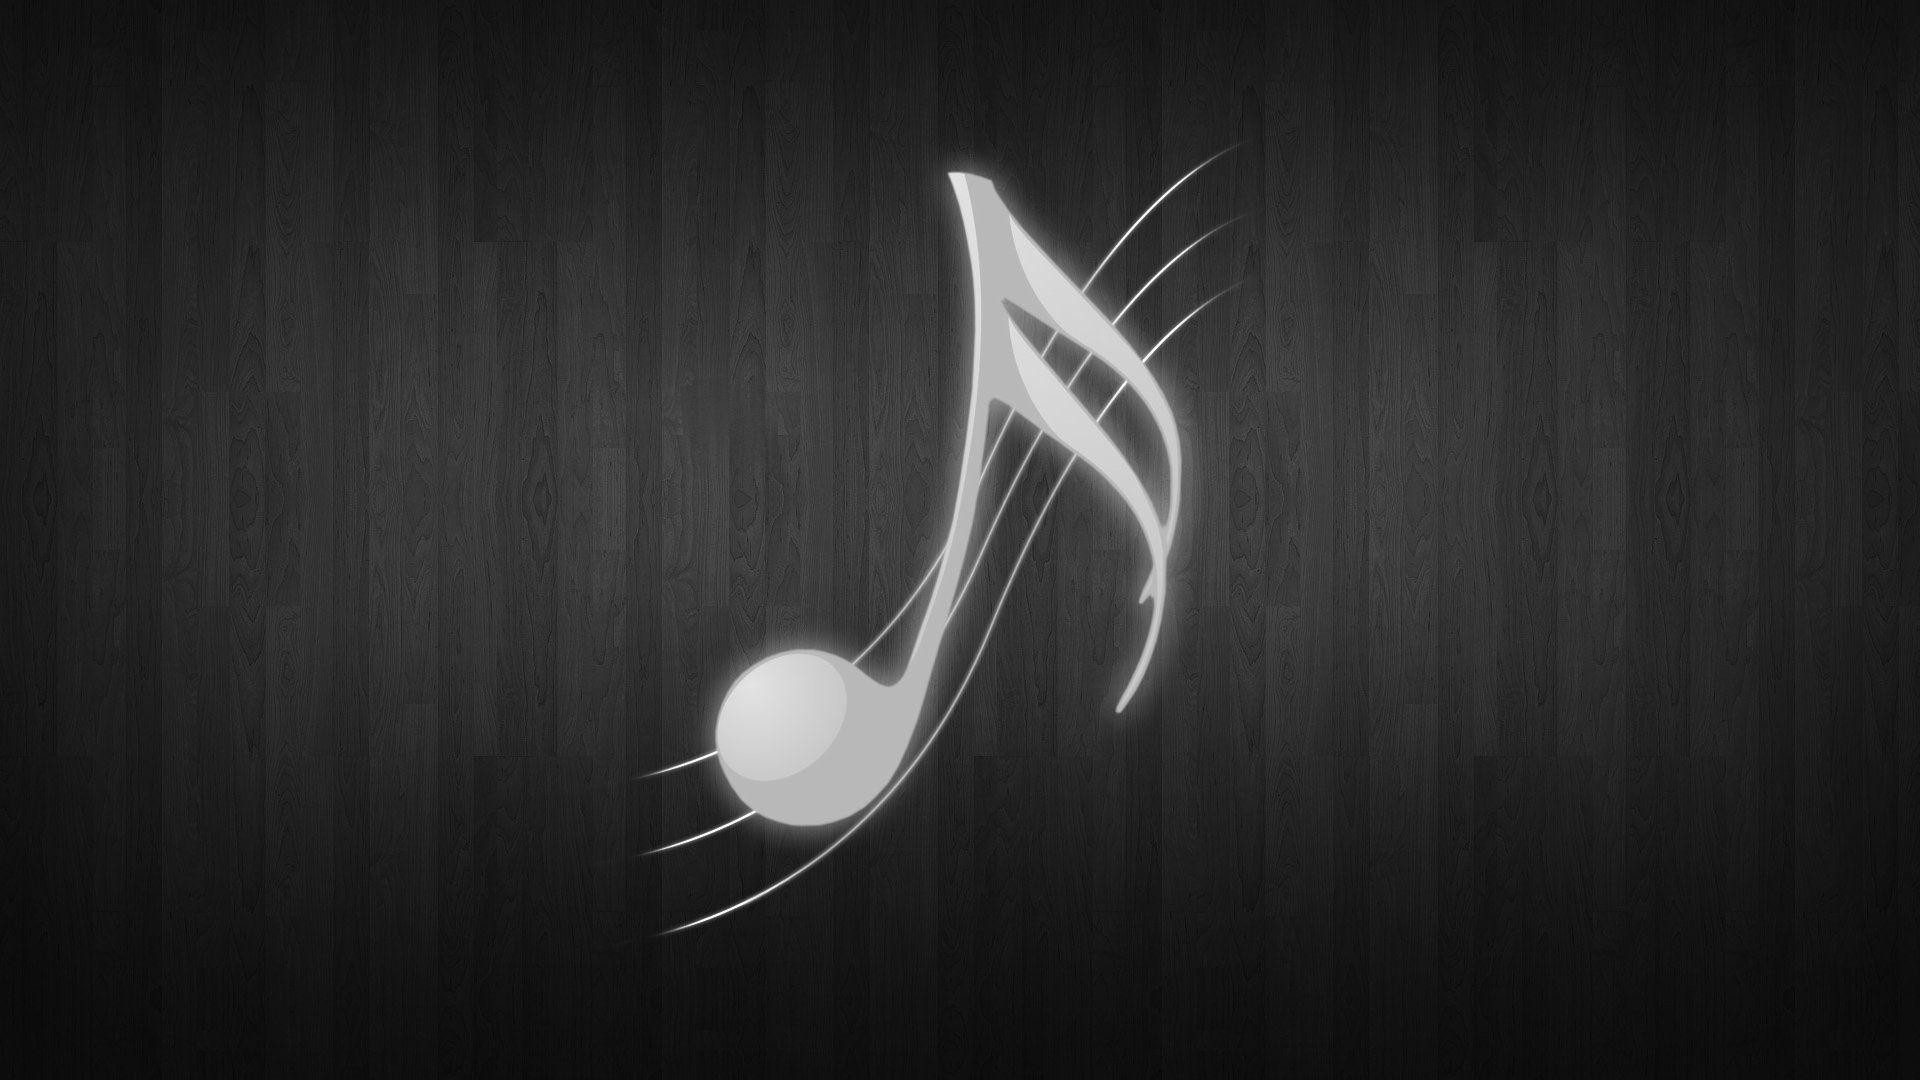 1920x1080 Wallpapers For > Music Notes Wallpaper For Iphone